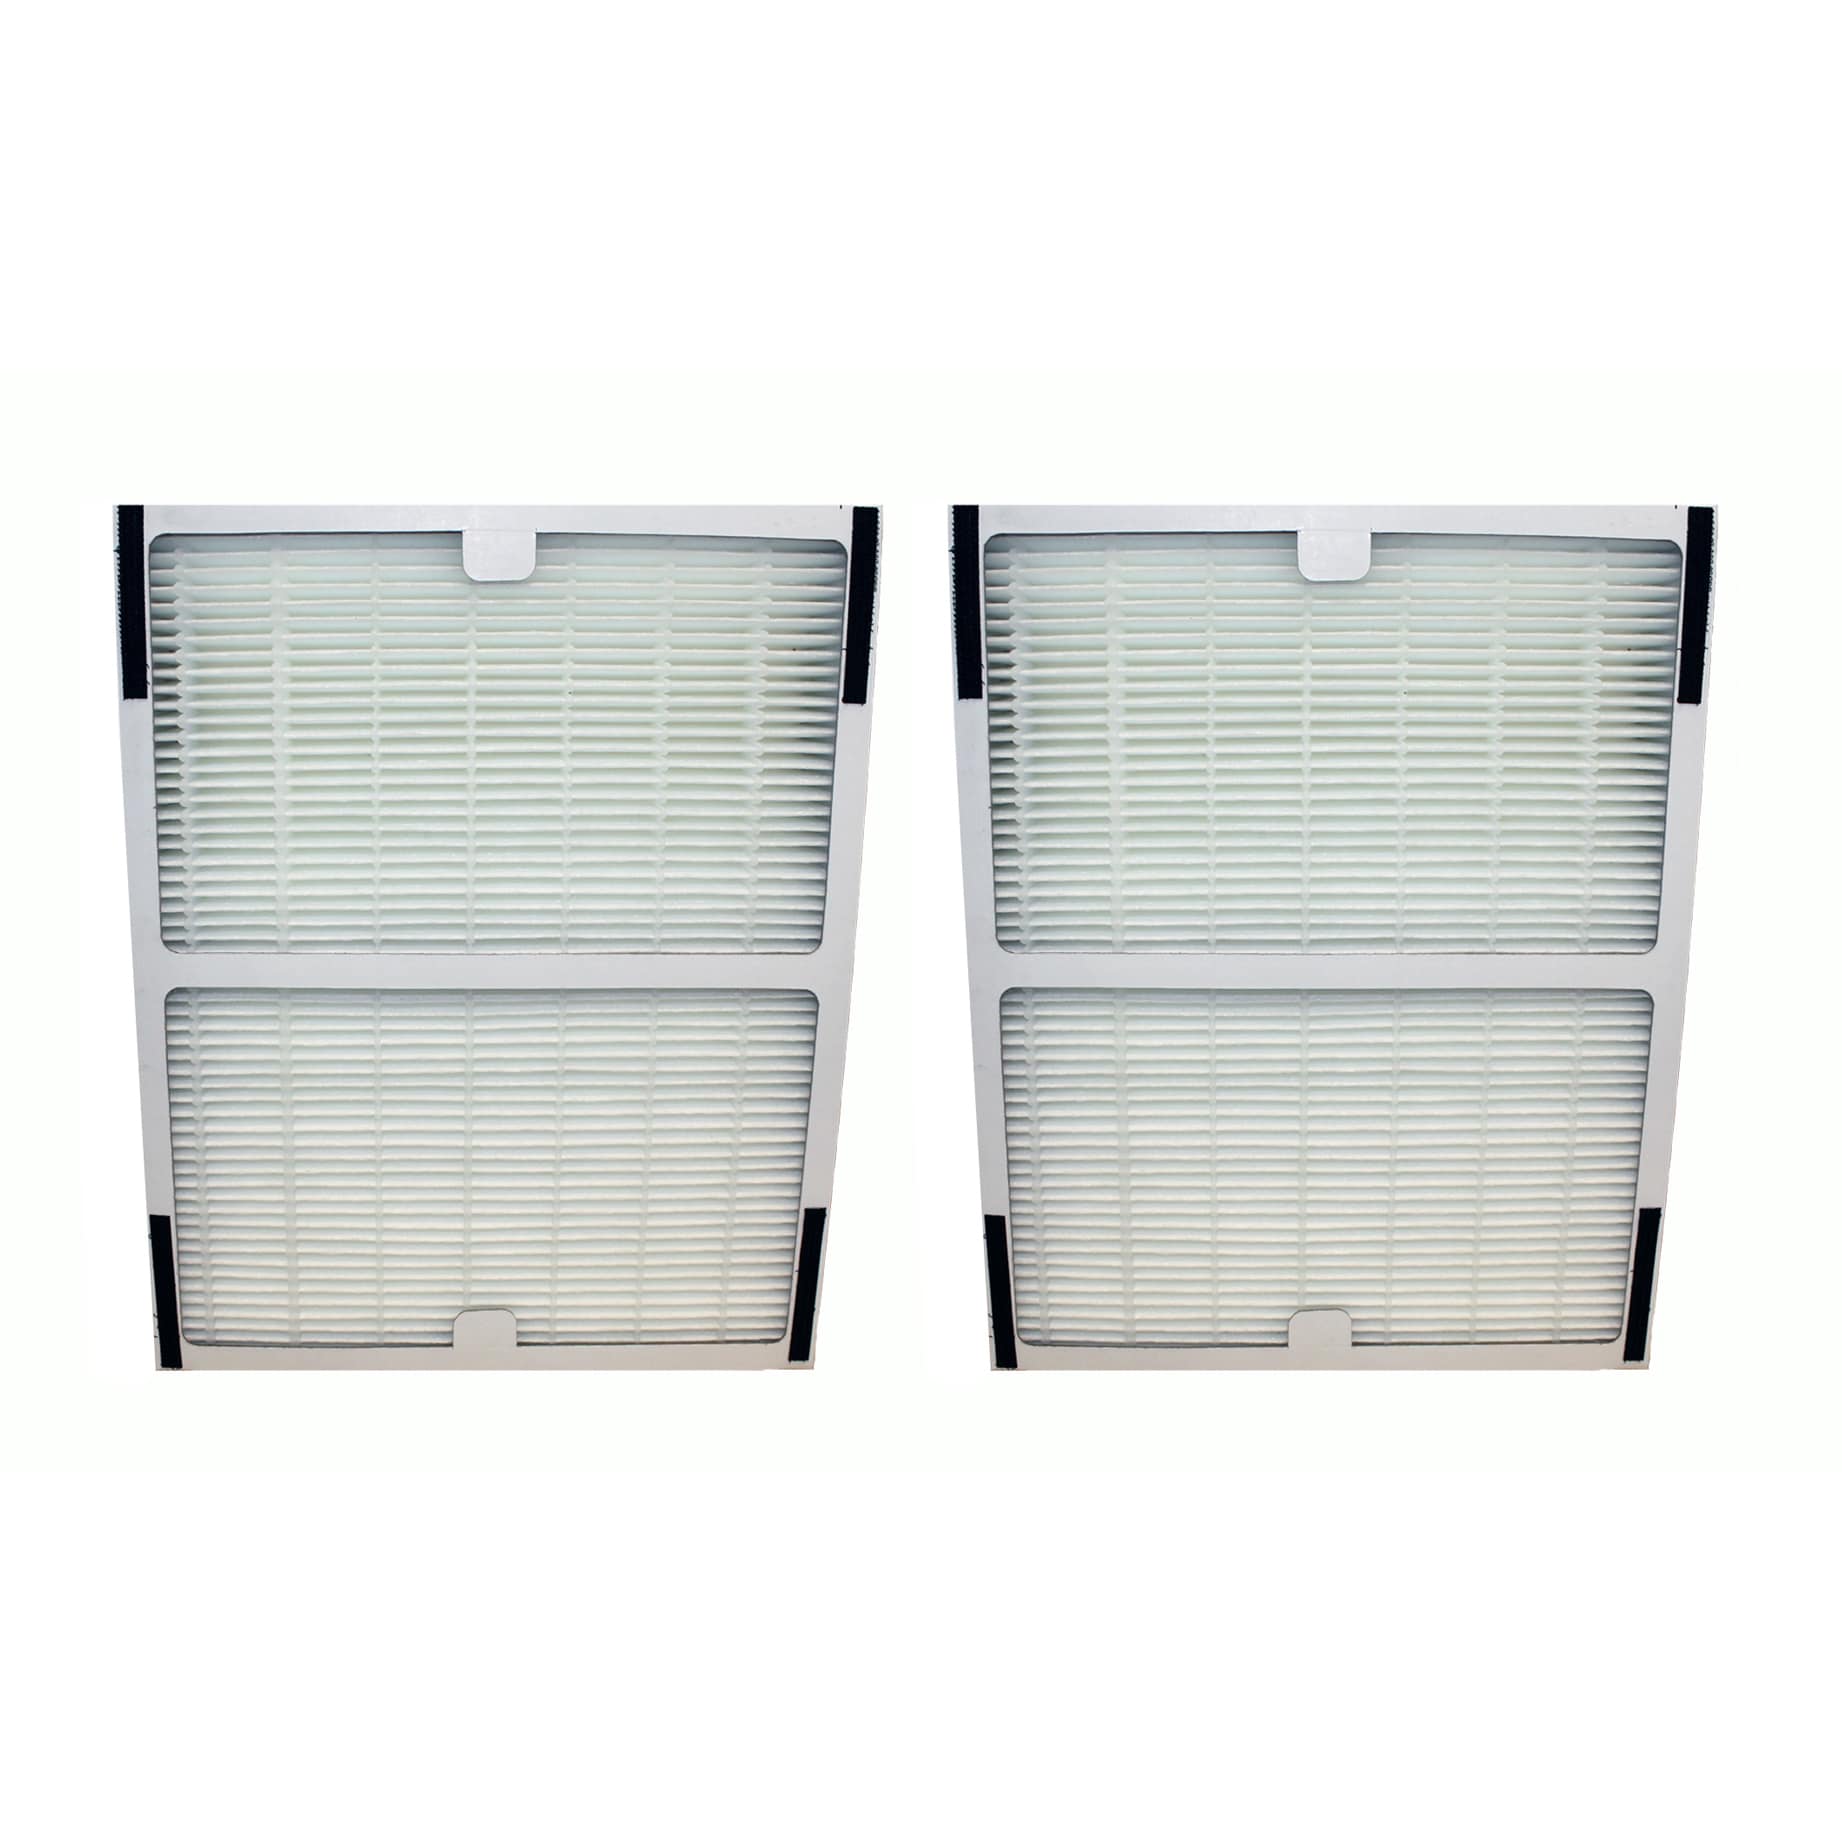 2pk Replacement A Air Purifier Filters, Fits Idylis